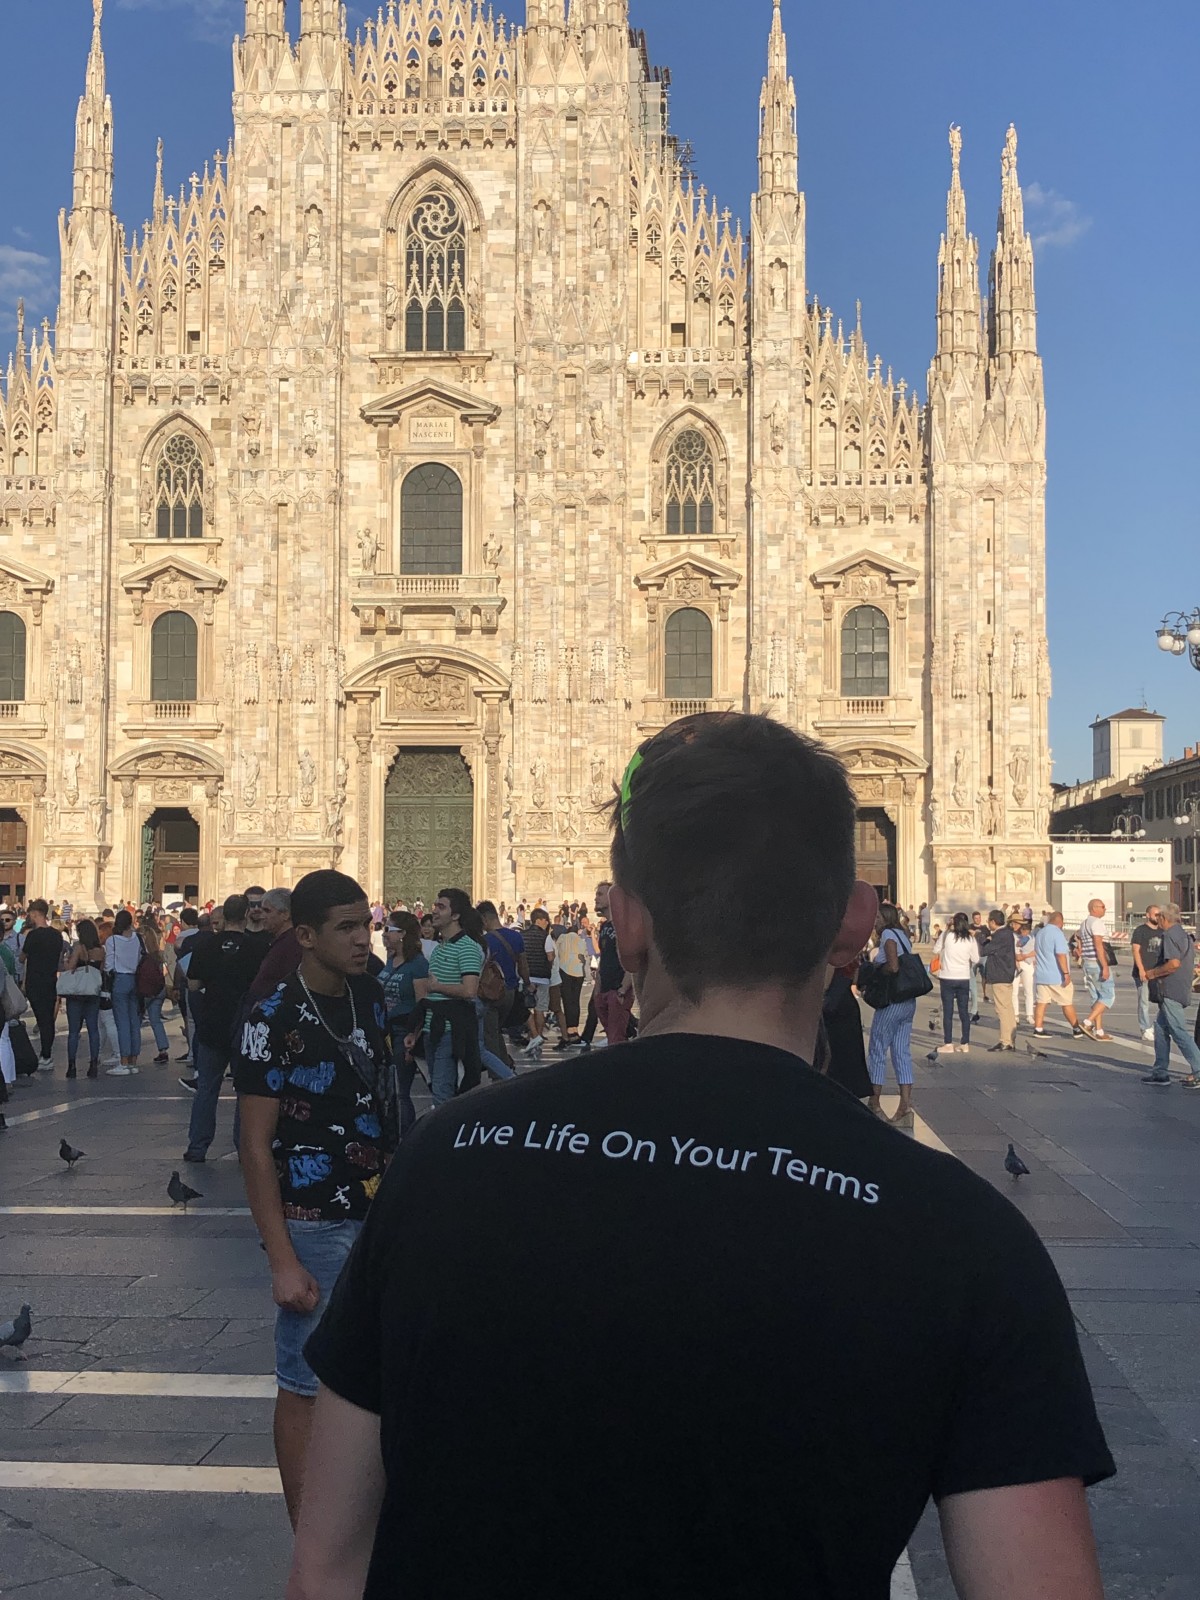 "My back in front of the Milan cathedral after the mission." - Olly